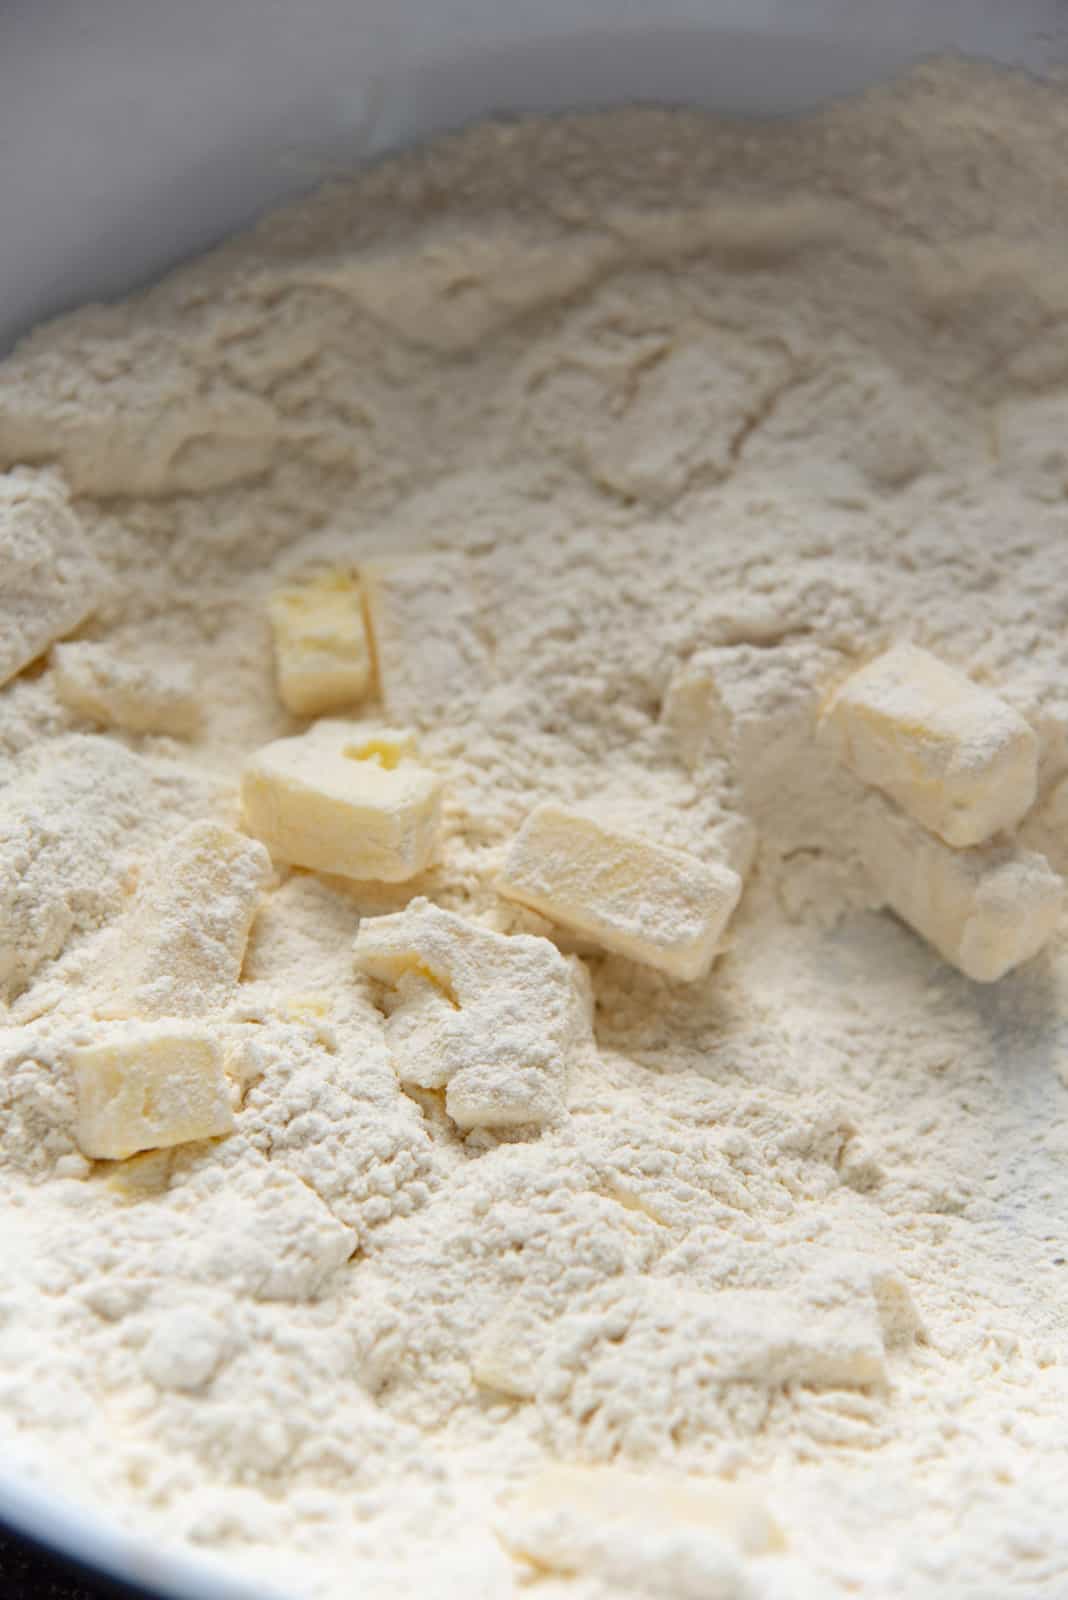 The cubed butter tossed in the flour.